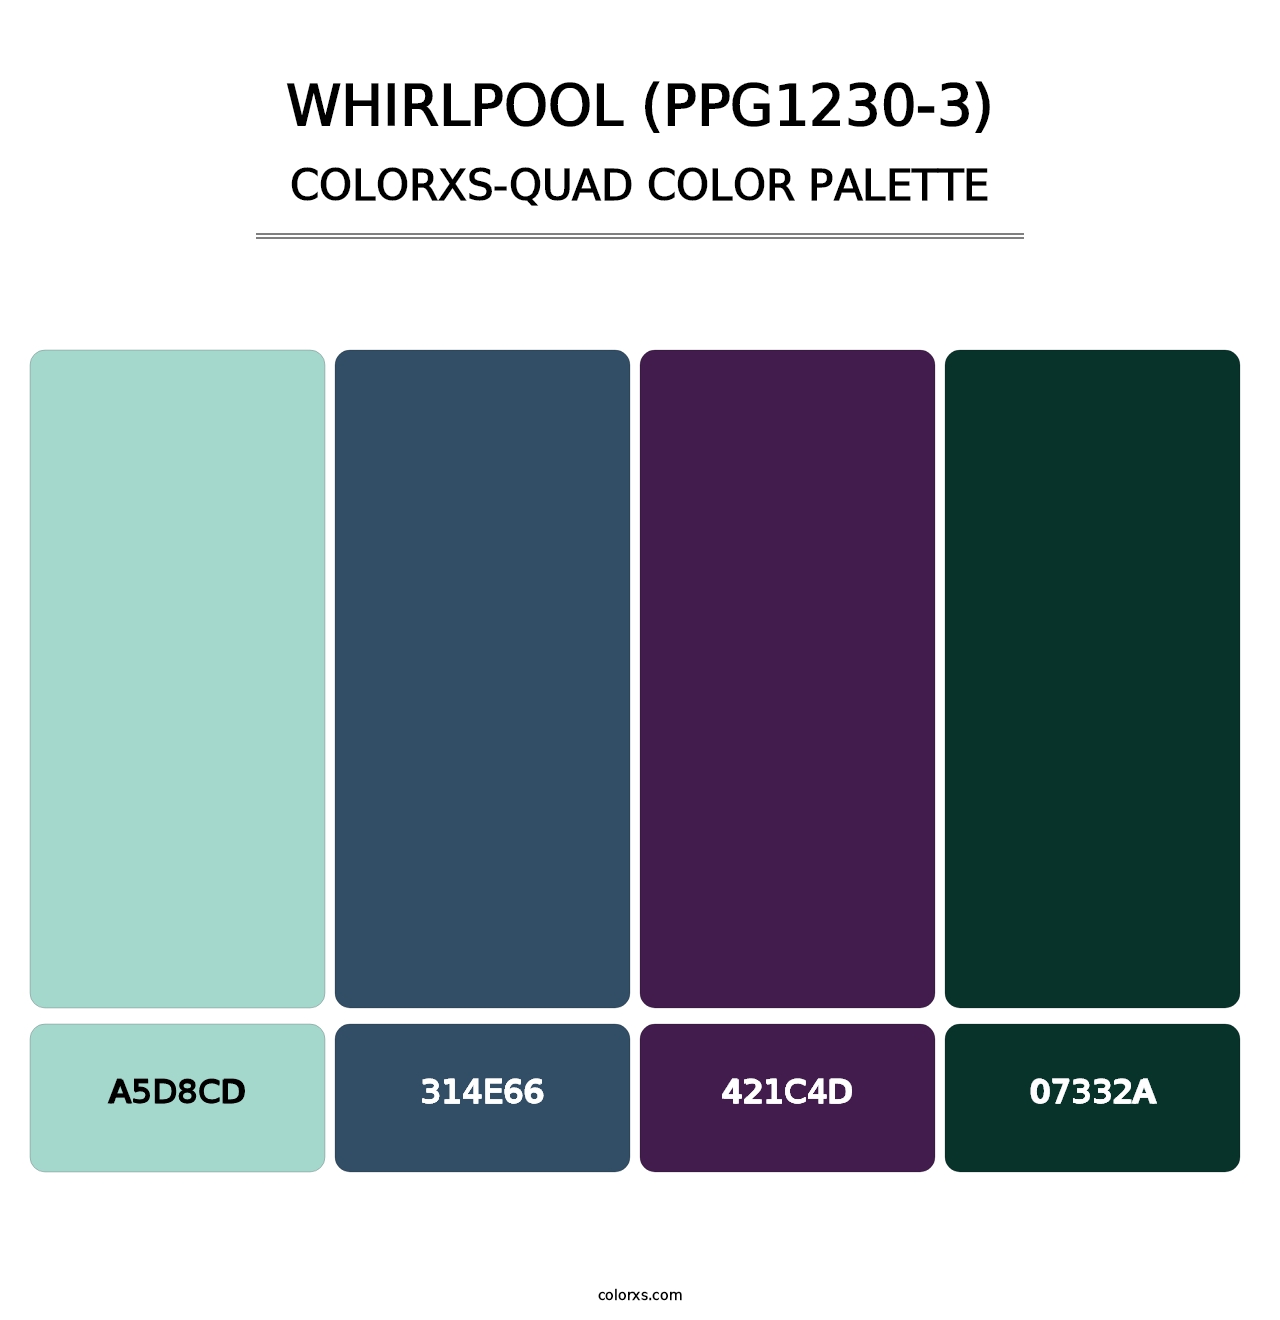 Whirlpool (PPG1230-3) - Colorxs Quad Palette